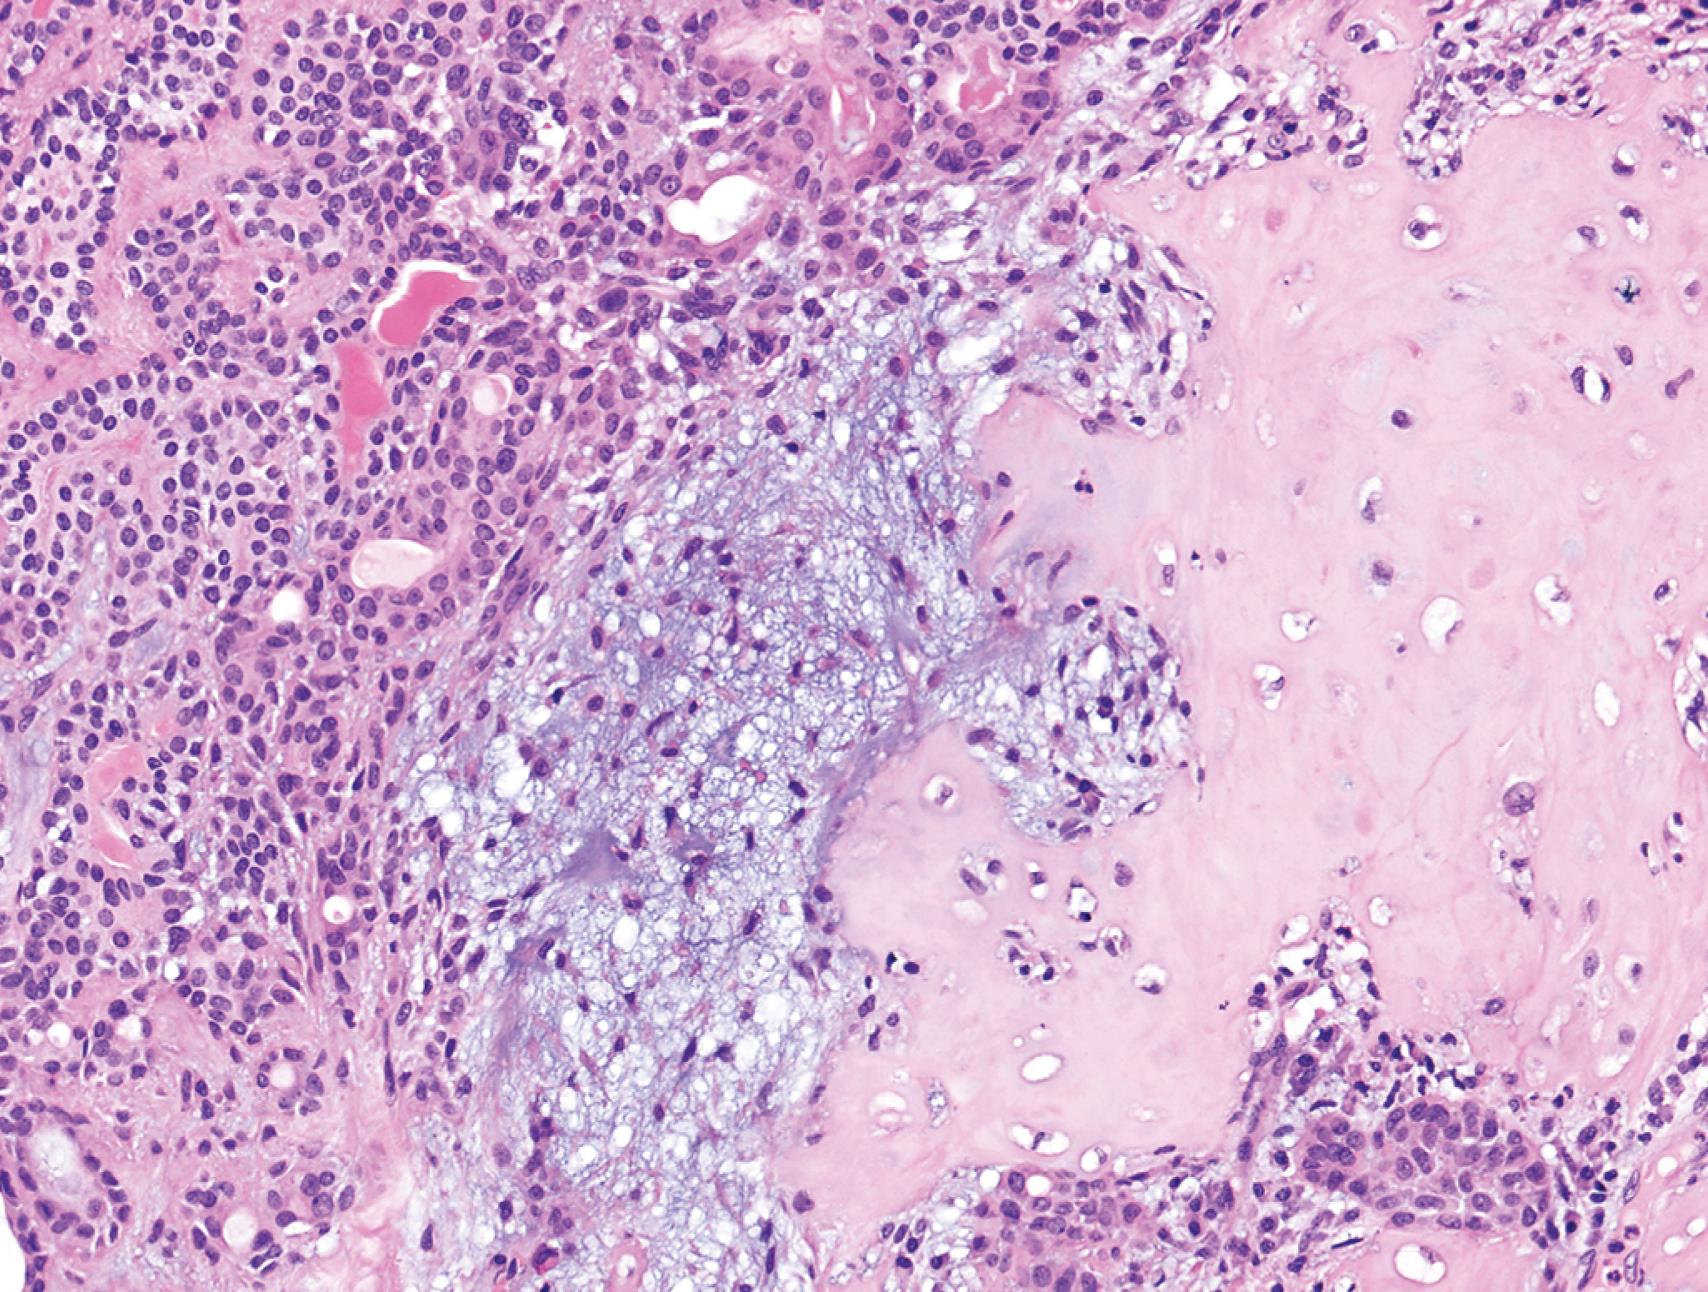 FIG. 6.2, Mixed tumor of the parotid gland. Areas containing nests of epithelial cells (on the left) and myxoid stroma forming cartilage and bone (an unusual feature, on the right) are present in this field.